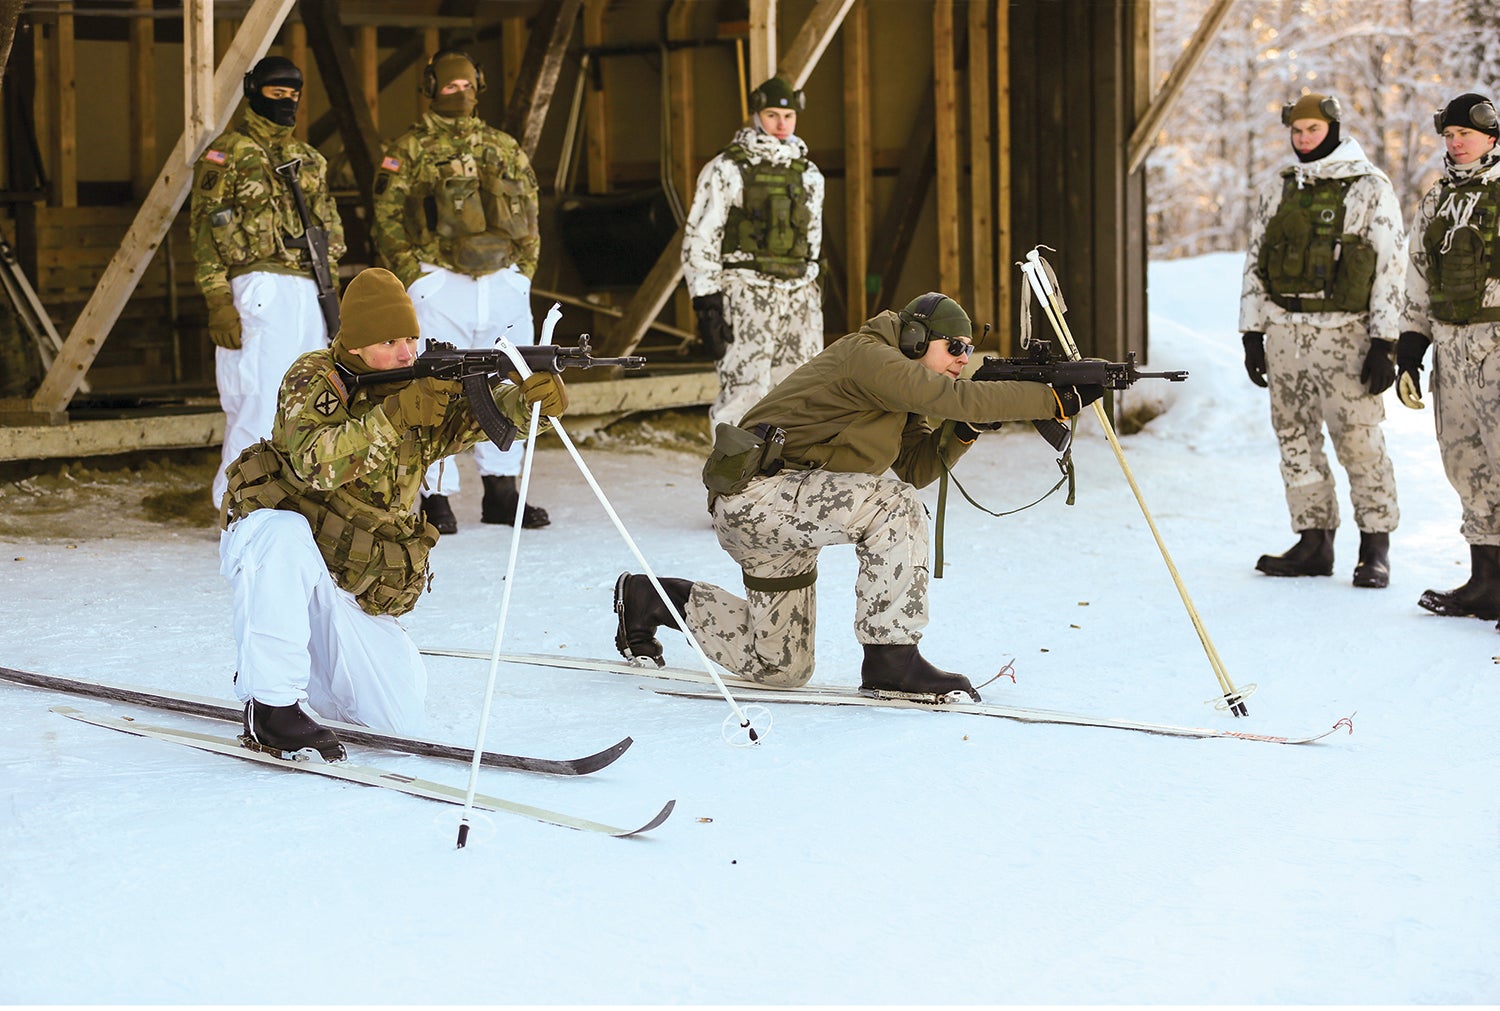 Soldiers with the 1st Brigade Combat Team, 10th Mountain Division, train with their Finnish partners during an exercise in Finland. (Credit: U.S. Army/Sgt. 1st Class Matthew Keeler)